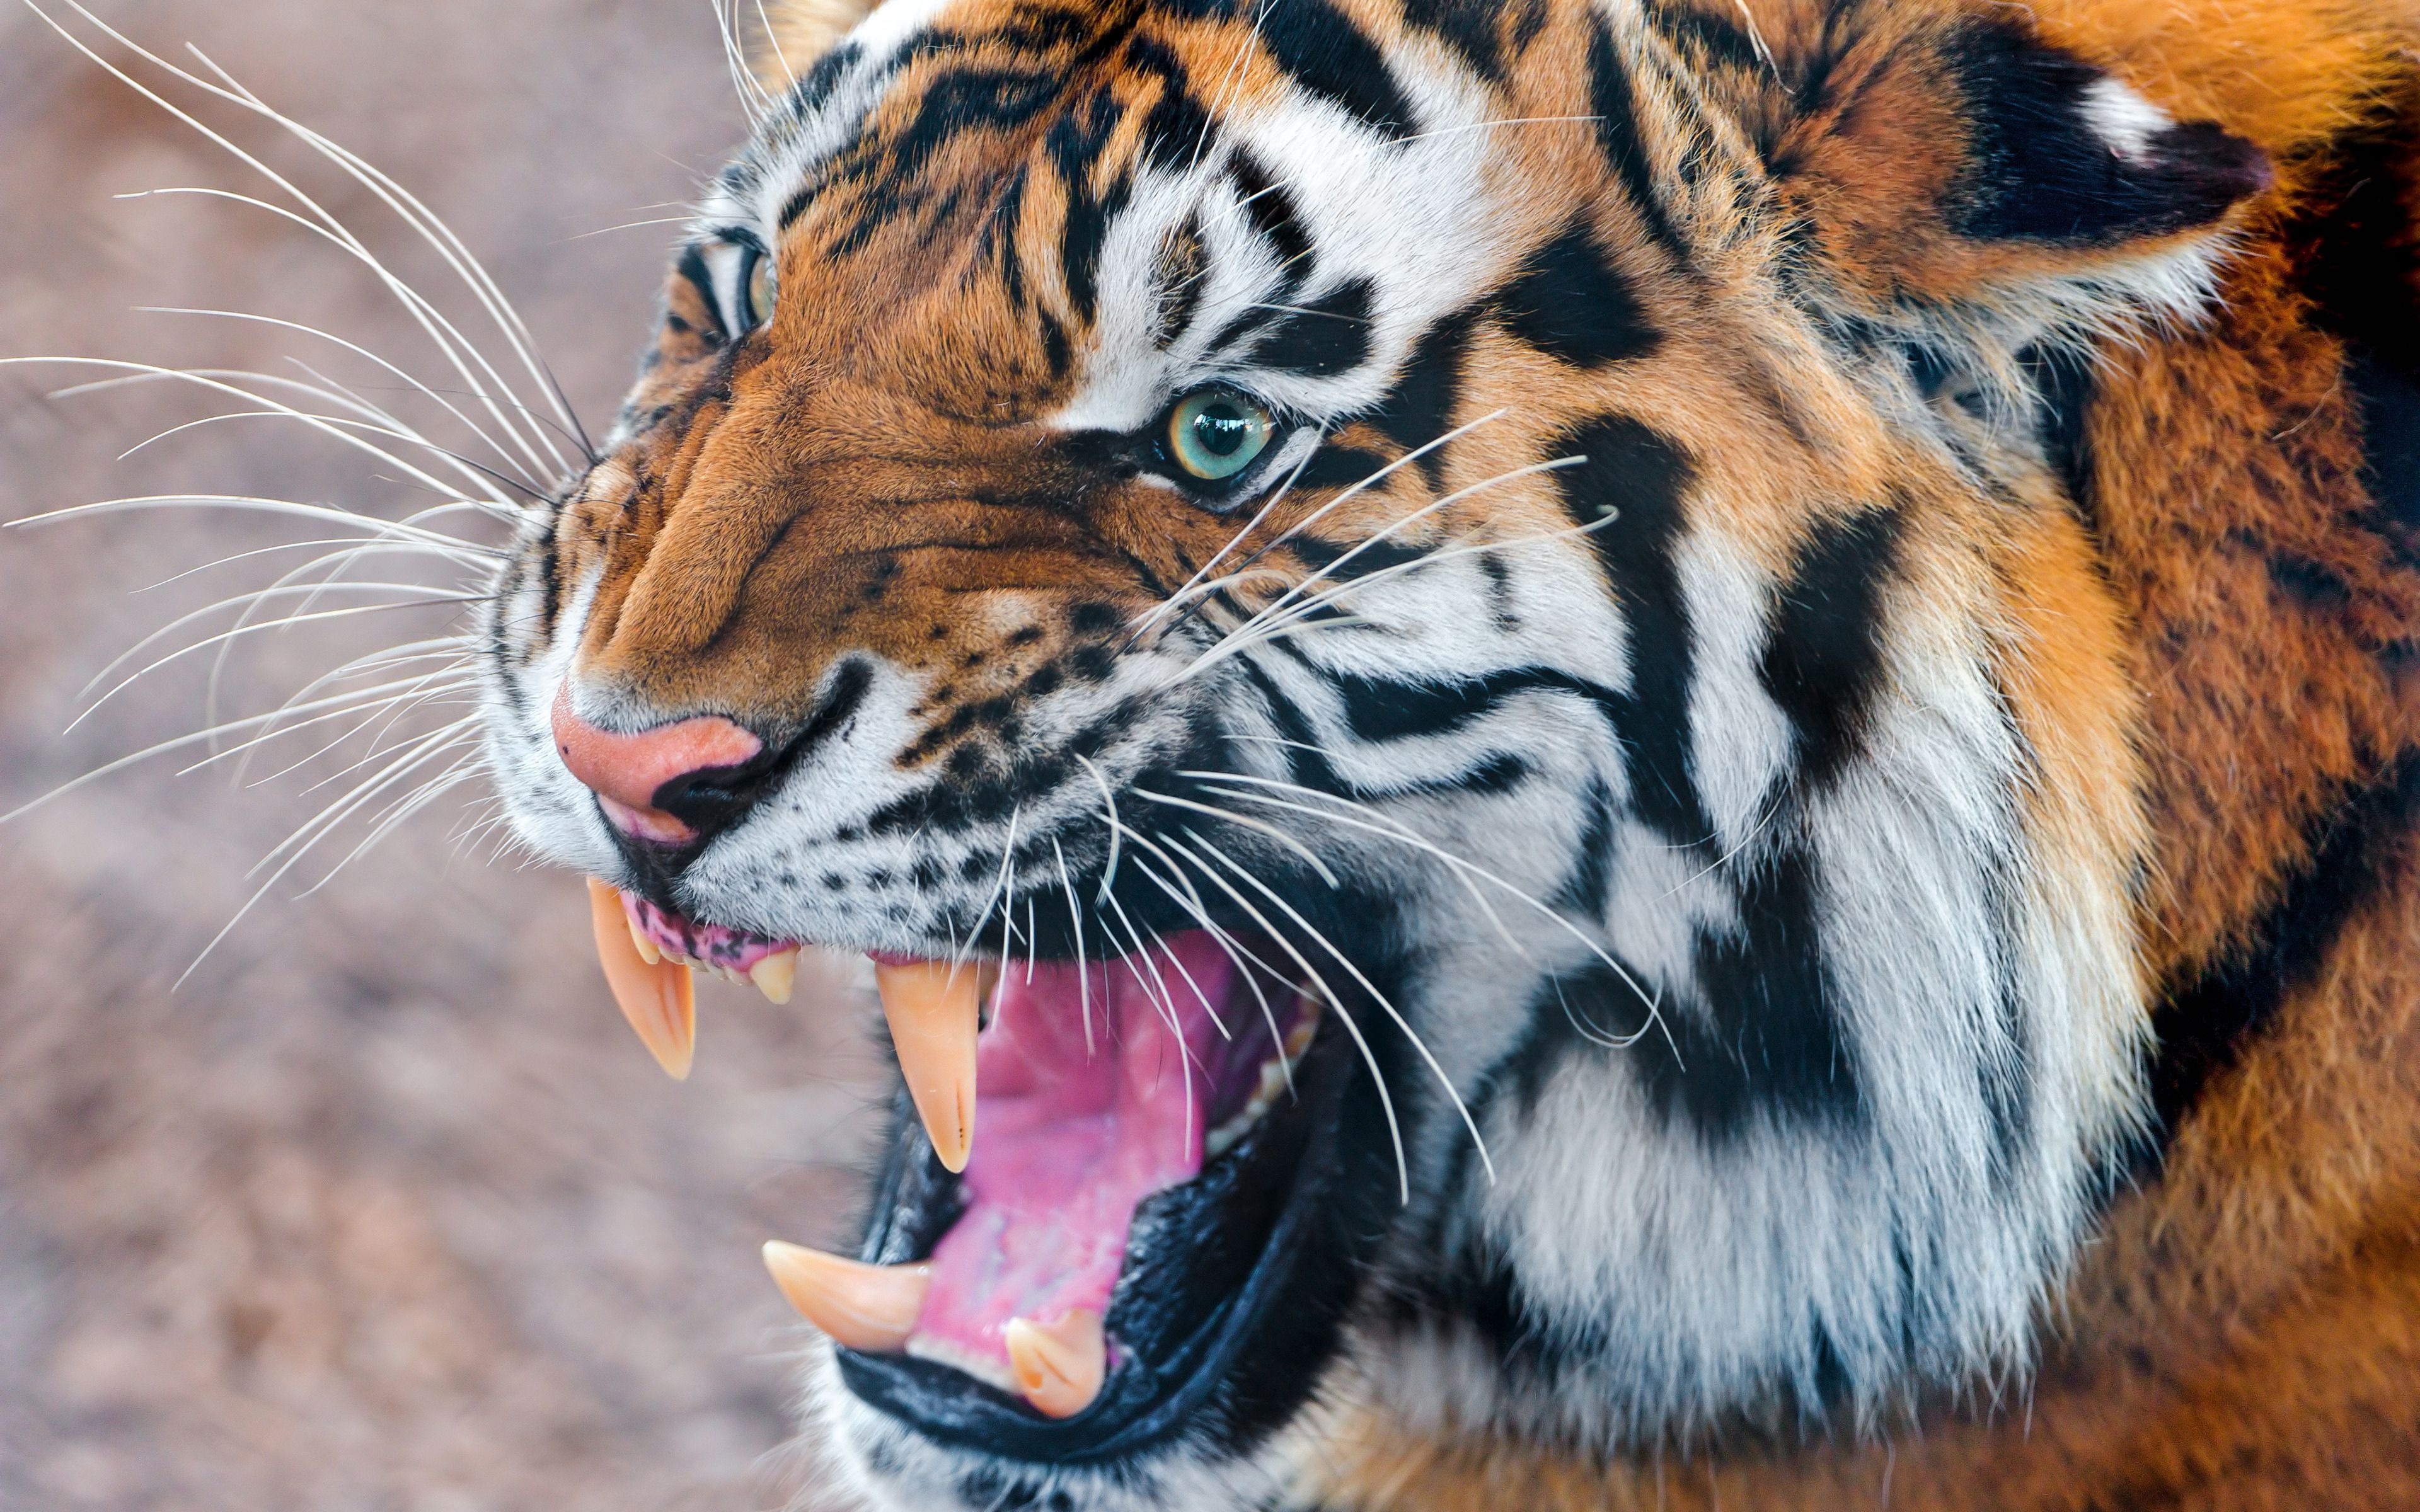 tiger, animals, aggression, grin, muzzle, anger